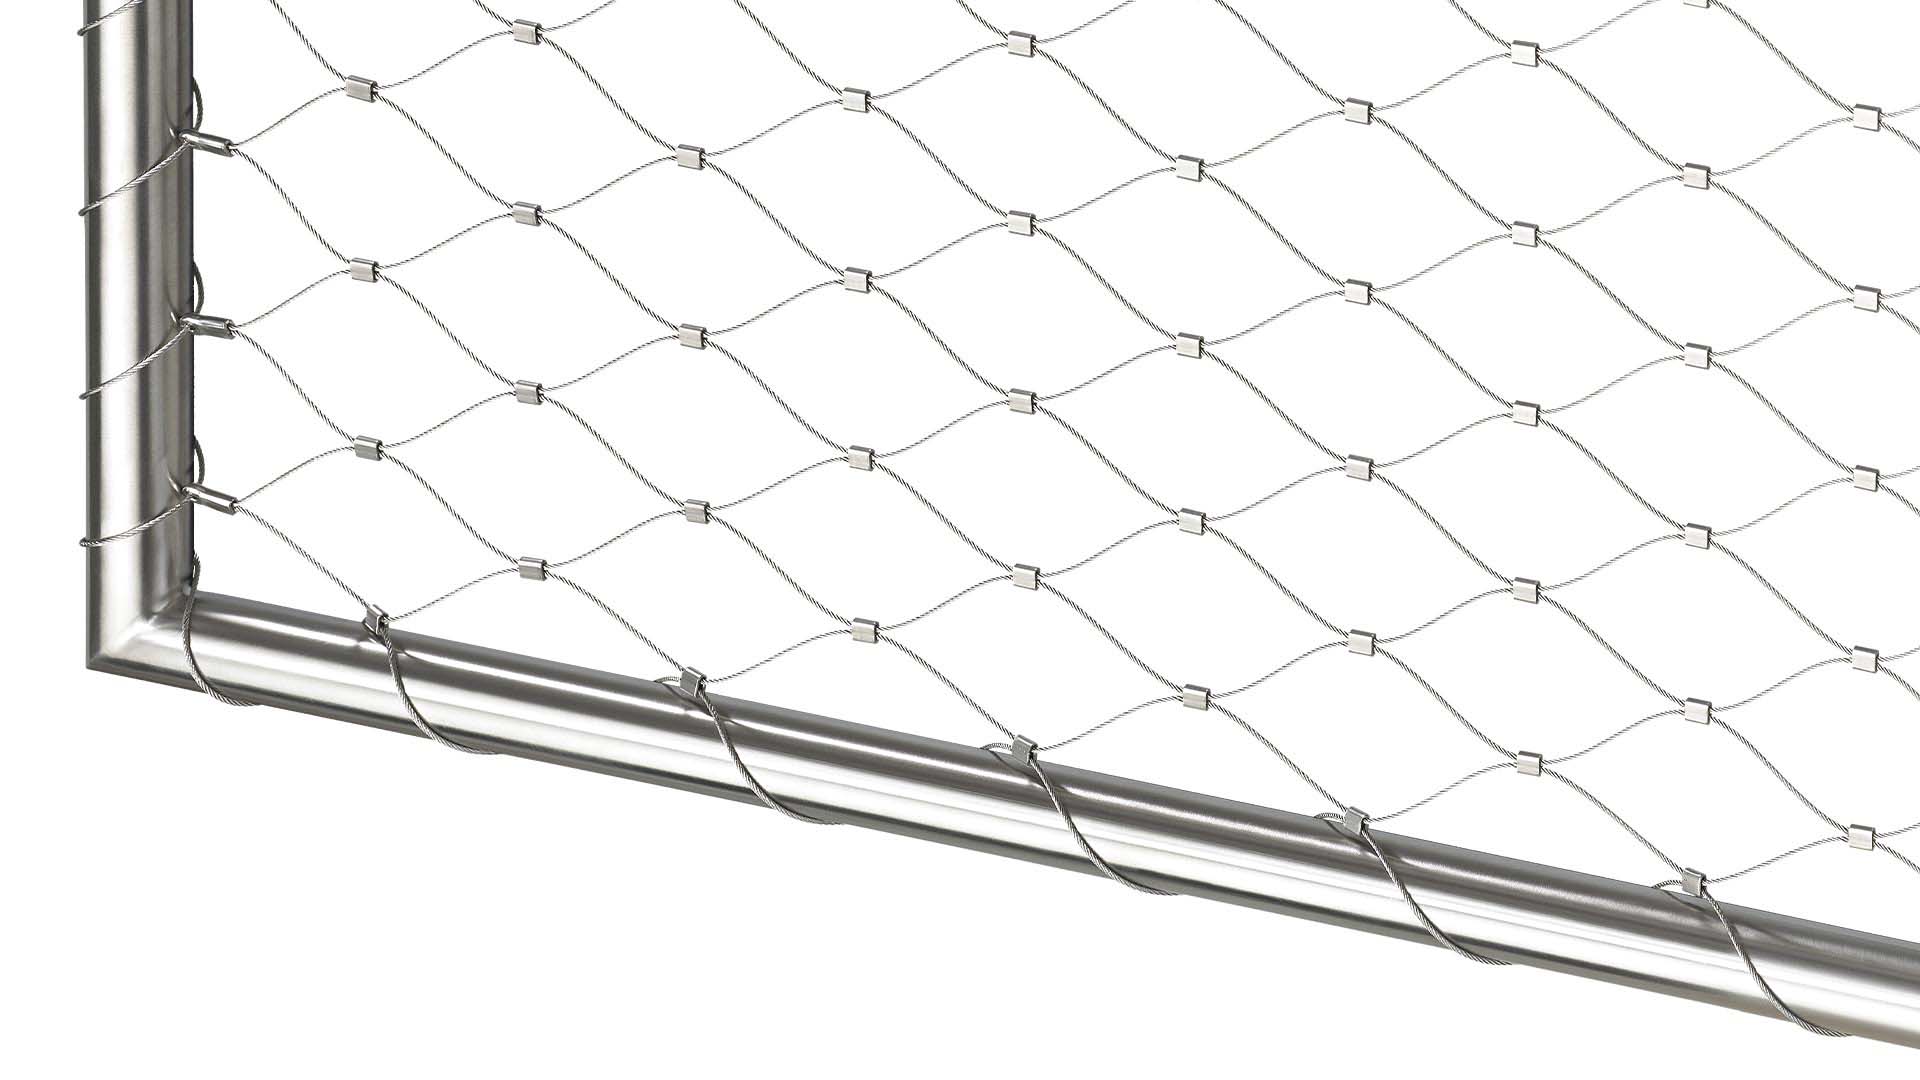 Stainless Steelframe with webnet wire mesh